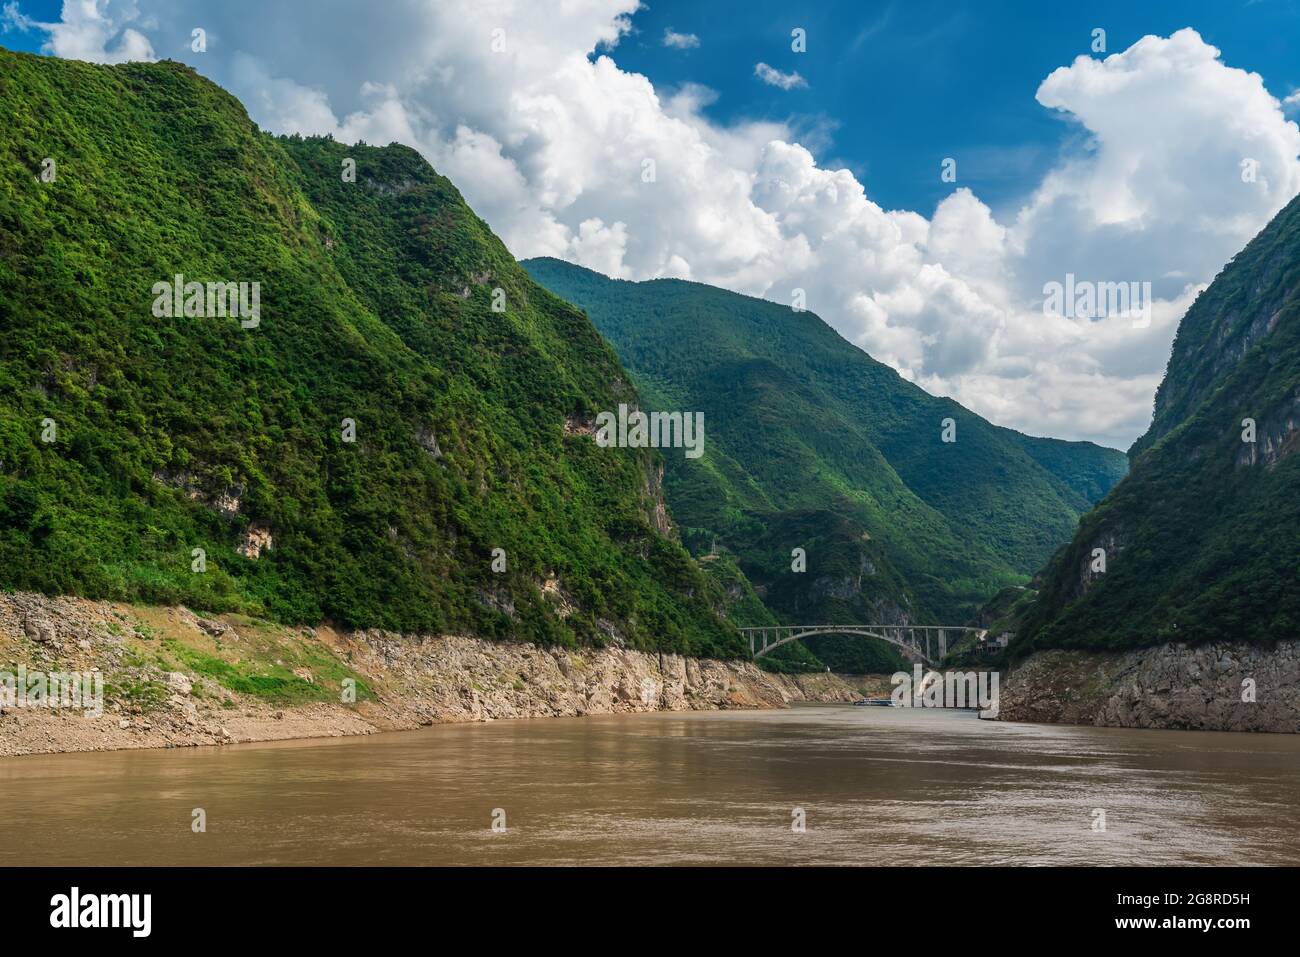 Arched bridge across the Wu gorge on the magnificent Yangtze River ...